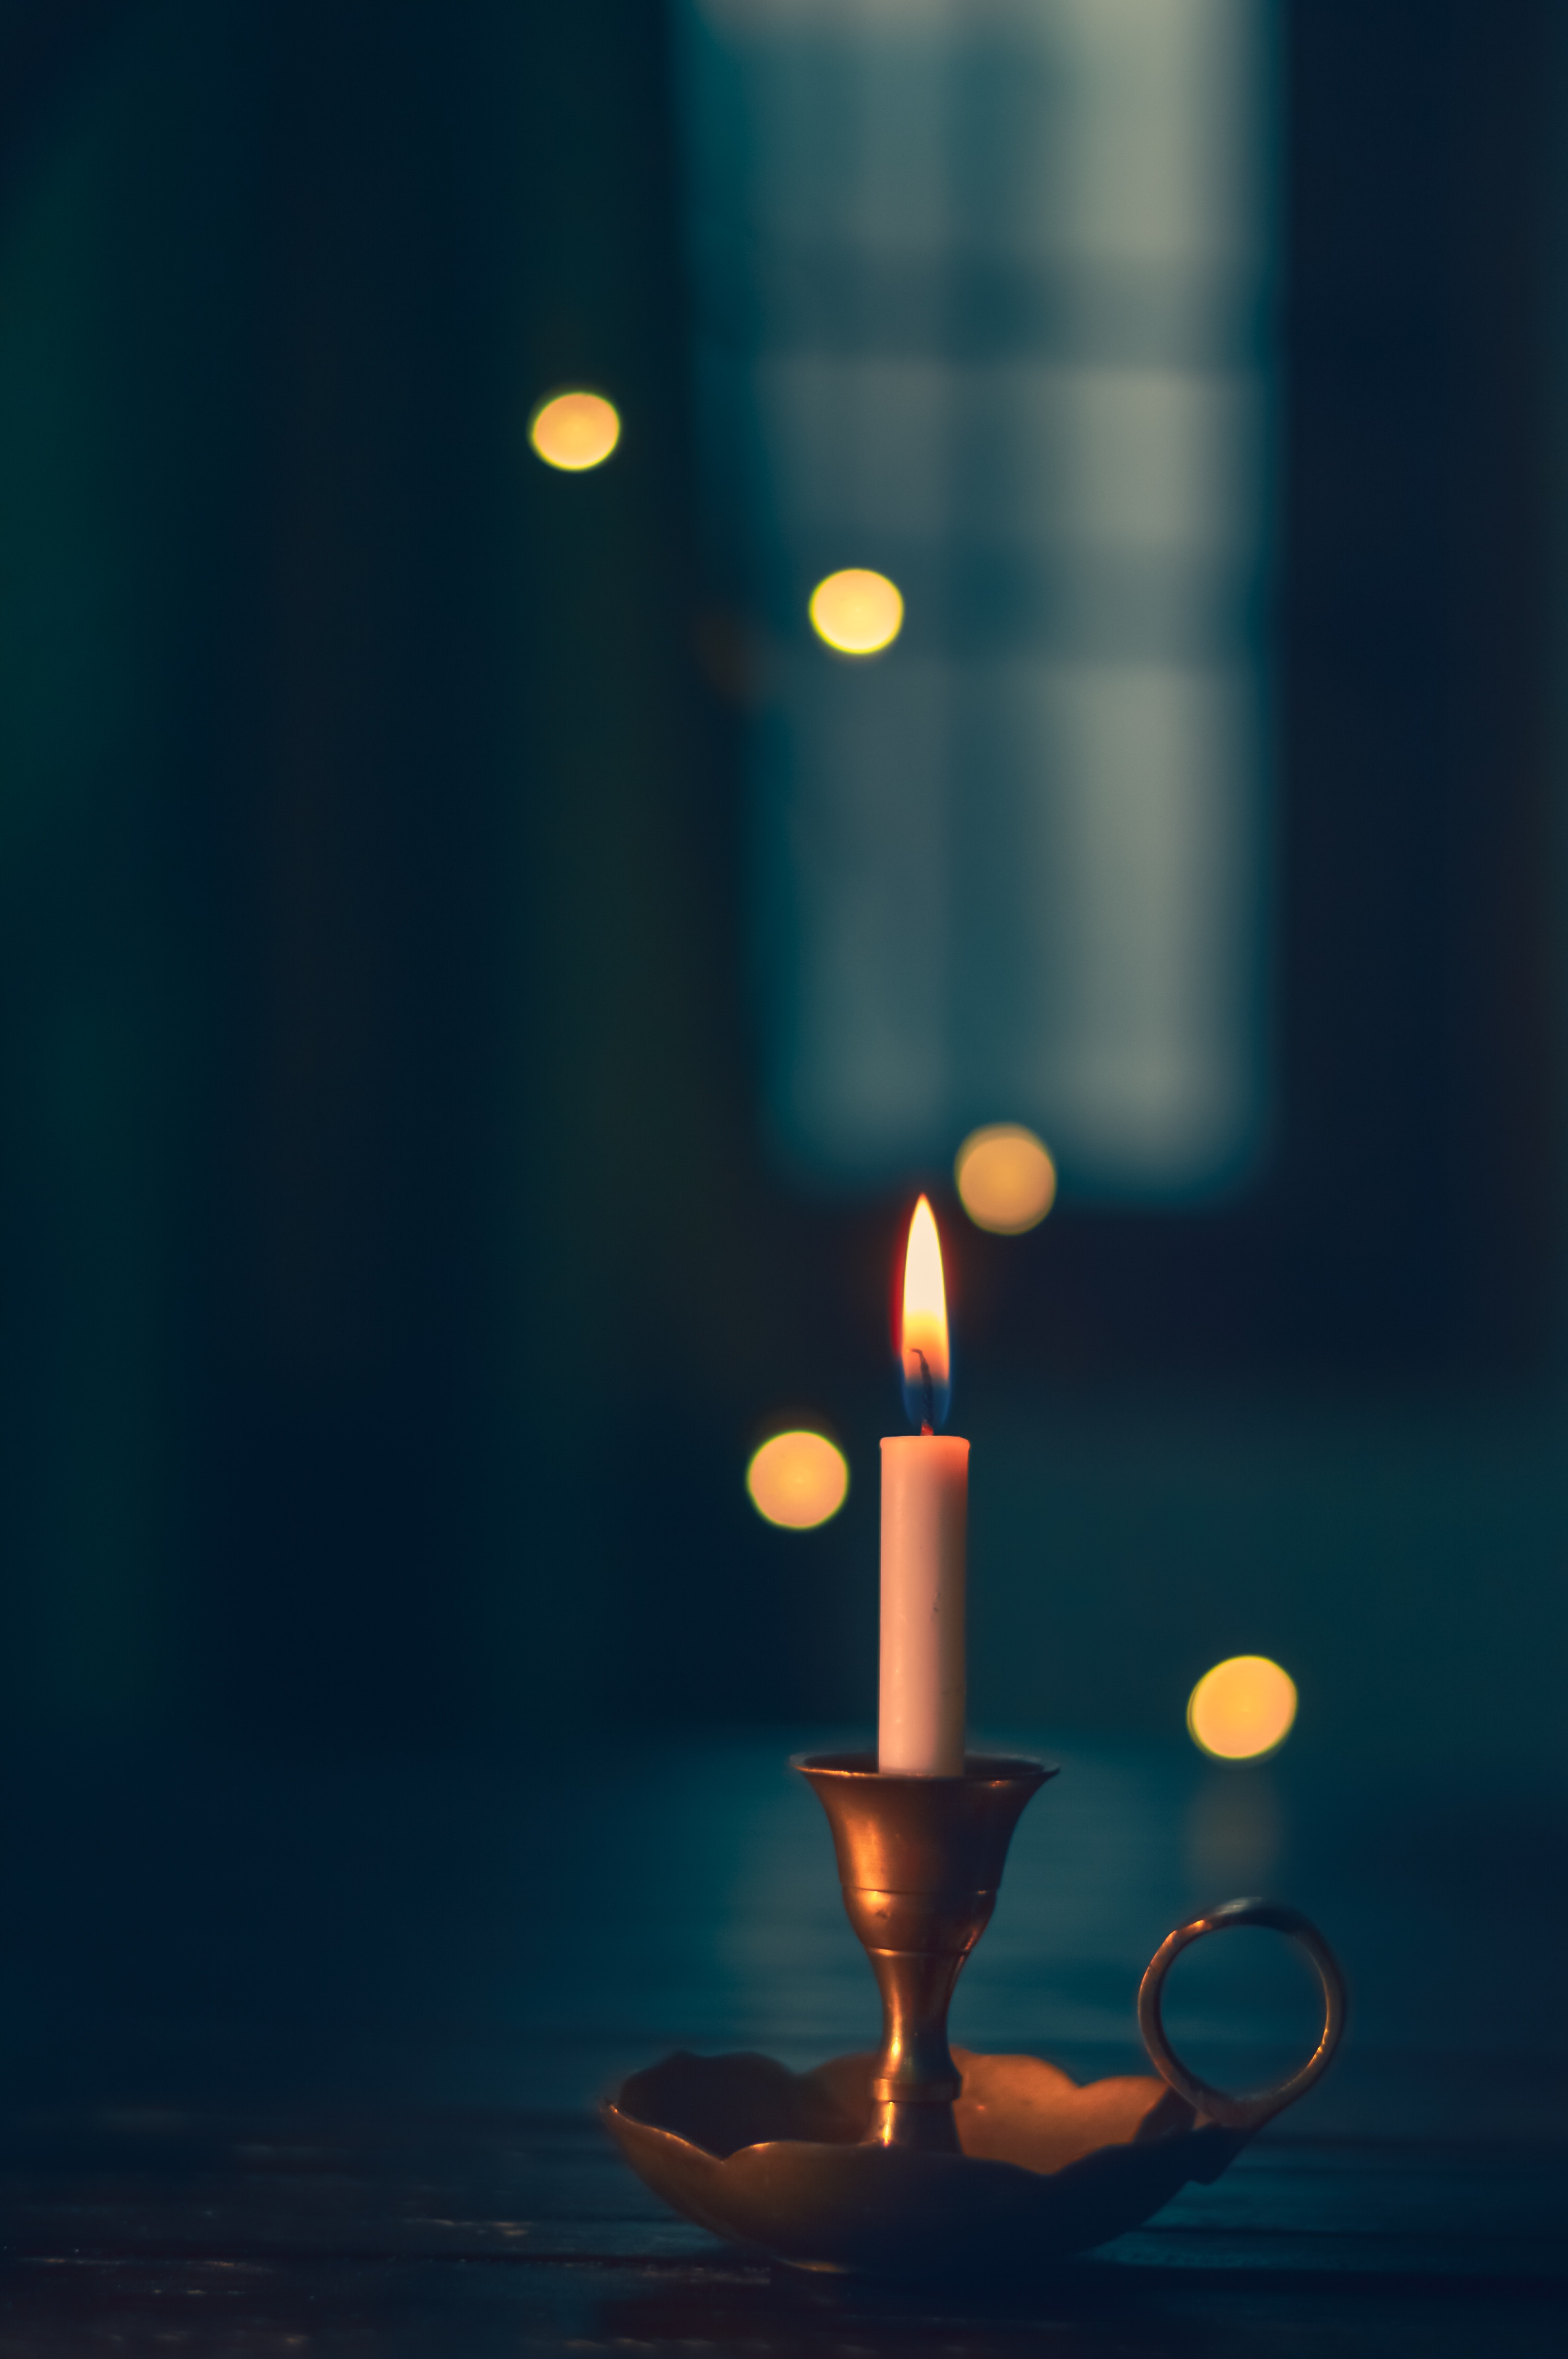 candle, blur, miscellanea, fire, miscellaneous, smooth, wick, wax, candlestick cellphone